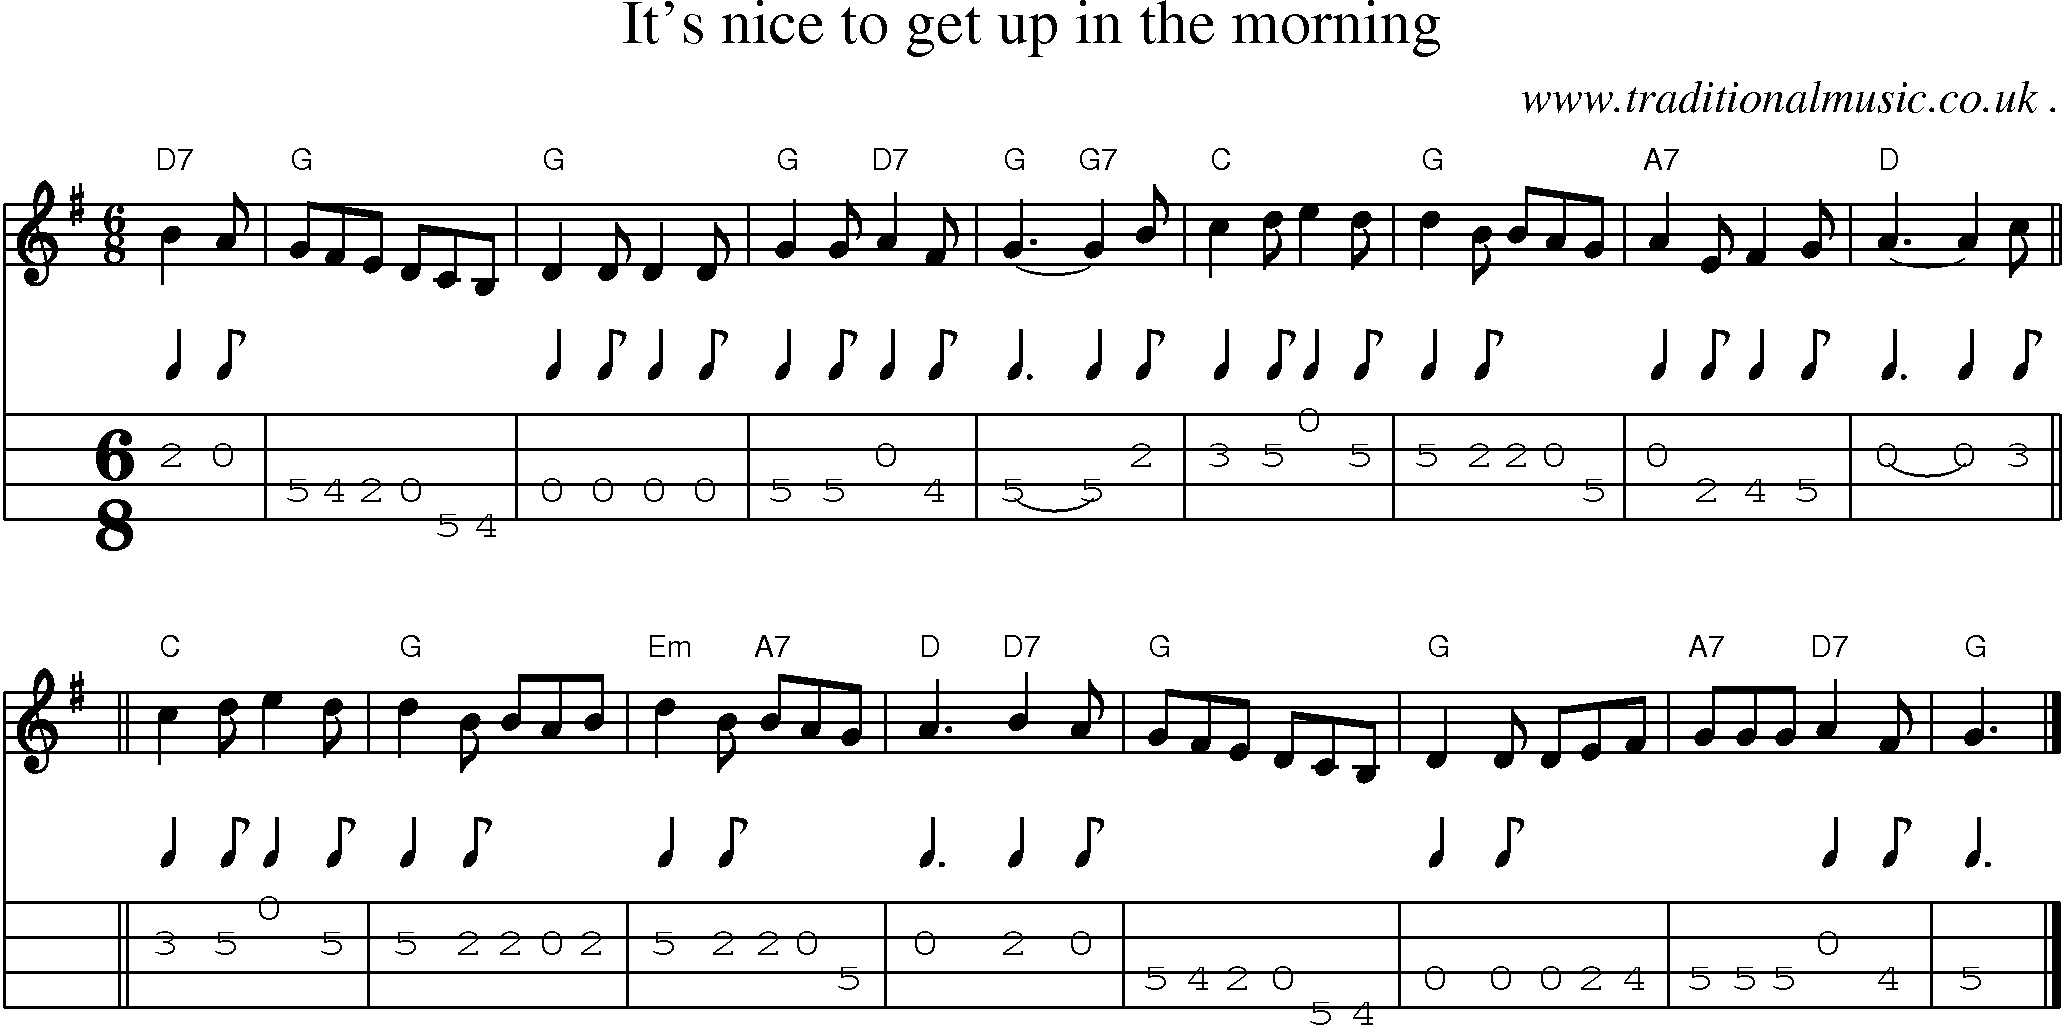 Sheet-music  score, Chords and Mandolin Tabs for Its Nice To Get Up In The Morning